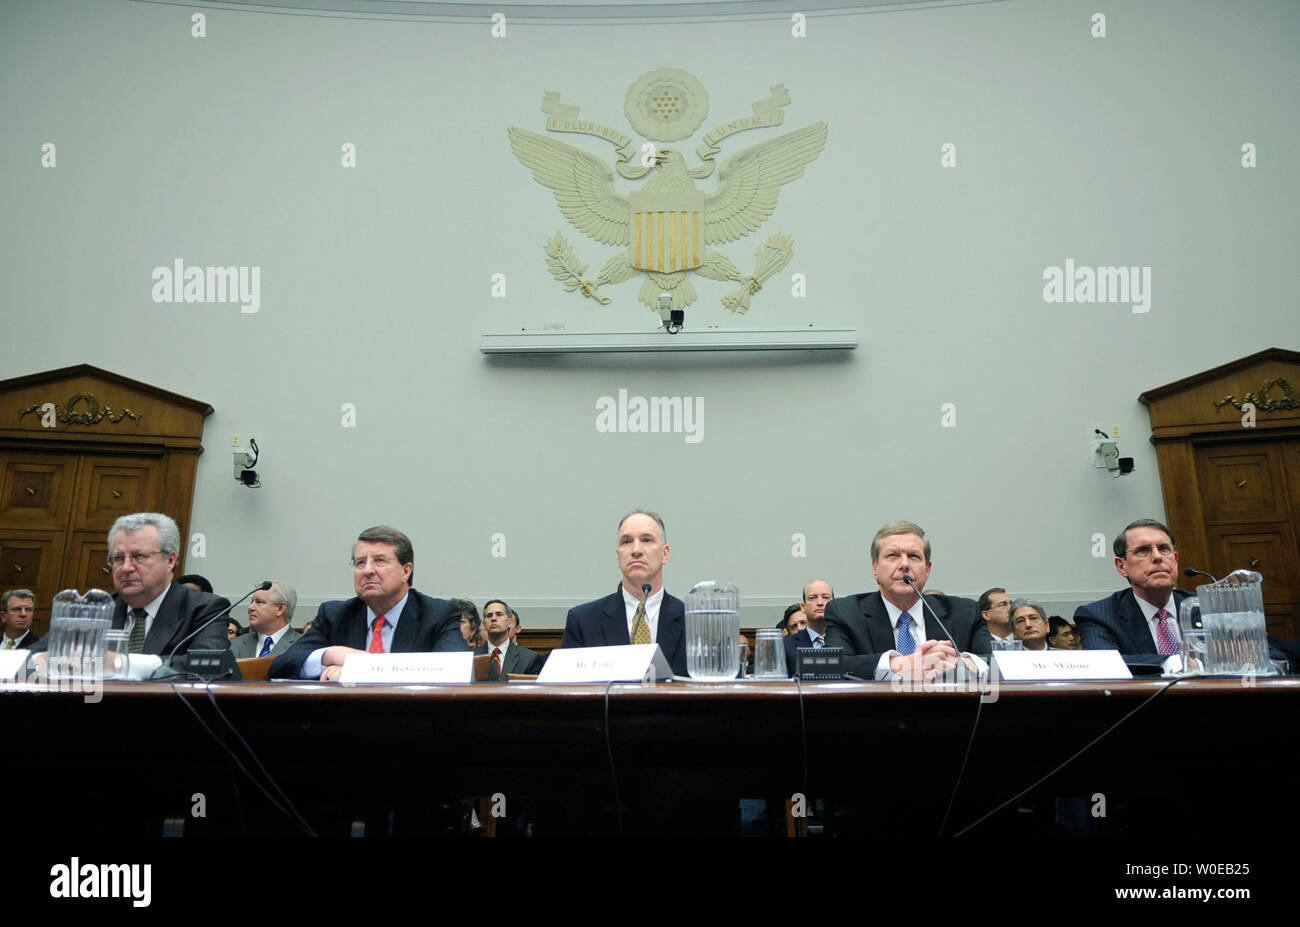 From left to right, John Hofmeister, president of Shell Oil Company, Peter Robertson, vice chairman of the Chevron Corporation, John Lowe, executive vice president of ConocoPhillips, Robert Malone, chairman and president of BP America Inc. and Stephen Simon, senior vice president of the Exxon Mobil Corporation, testify before a House Judiciary Committee hearing on the rising price of oil in Washington on May 22, 2008. (UPI Photo/Kevin Dietsch) Stock Photo